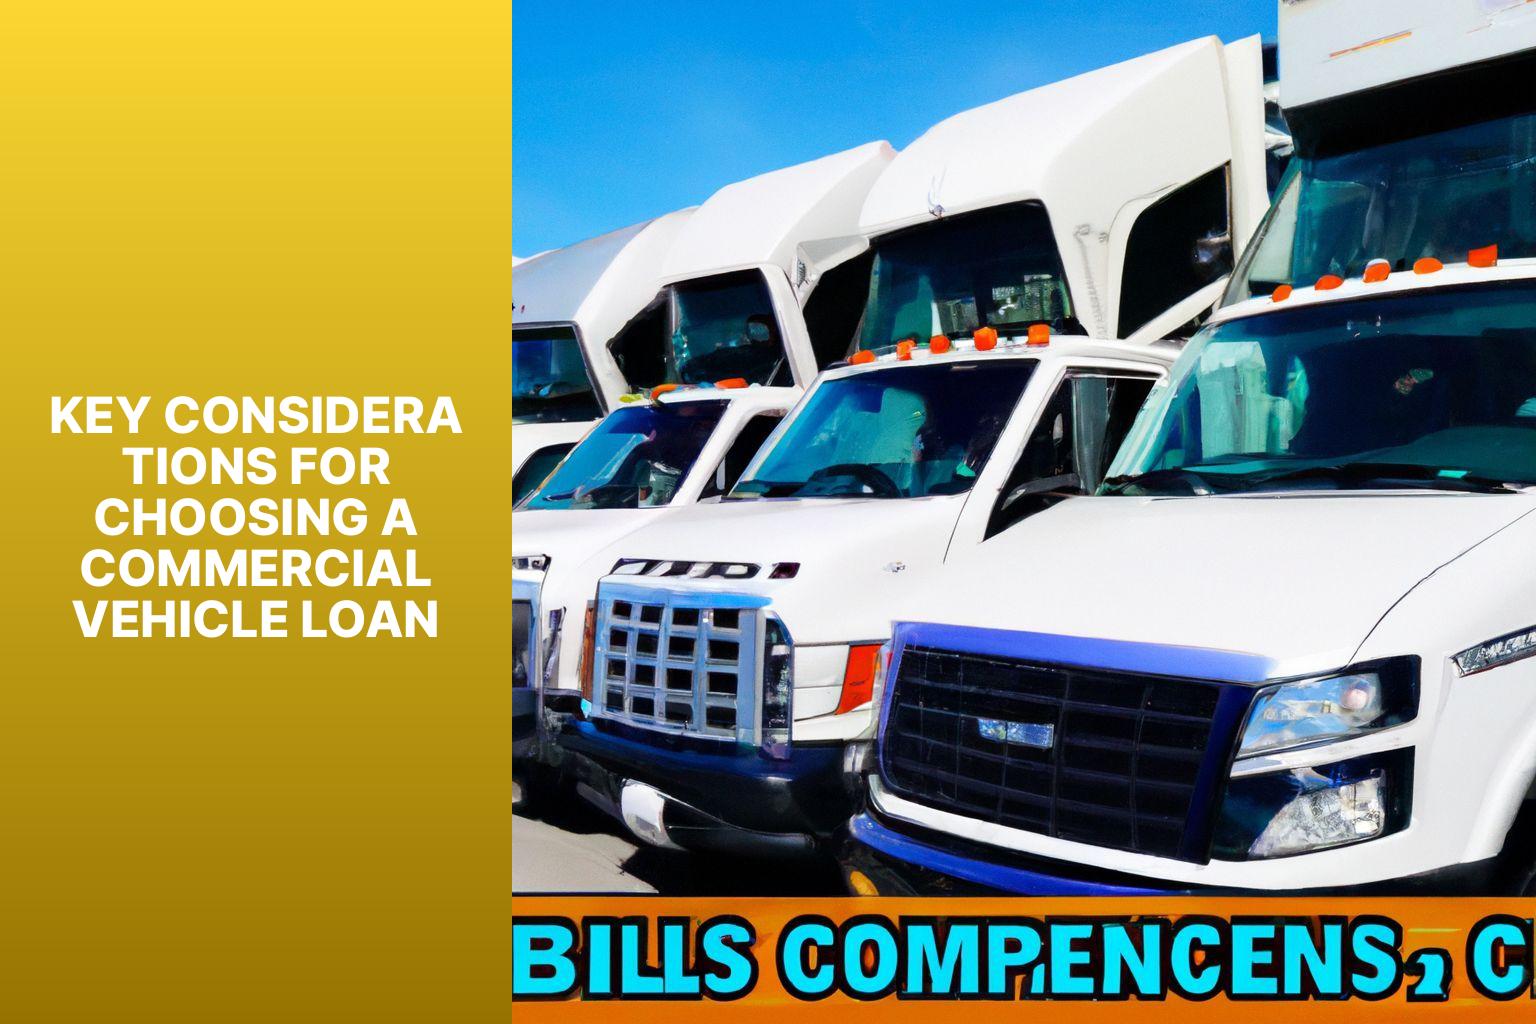 Key Considerations for Choosing a Commercial Vehicle Loan - Loan Showdown: A Comparative Study of Commercial Vehicle Loans 